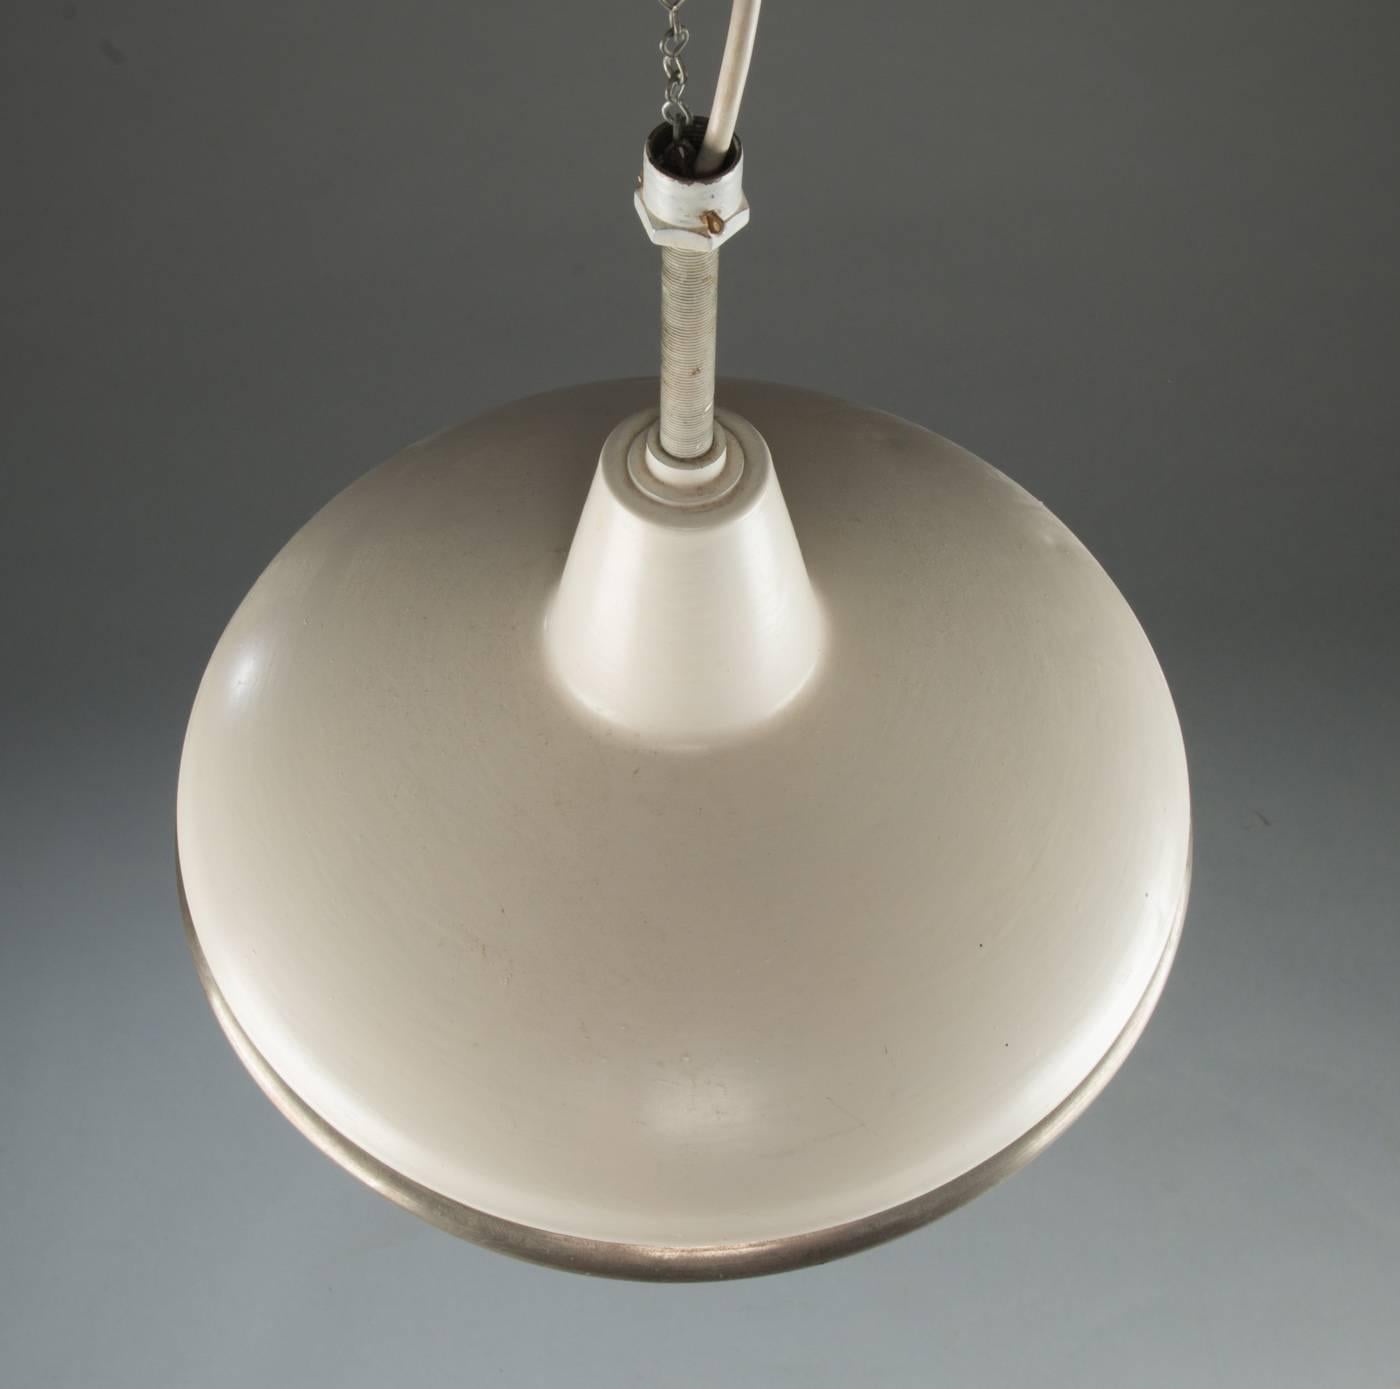 Sistrah pendant with opaline and clear/blue glass designed by Otto Müller 1931 in Germany. Fitted with one E27 socket up to 100 watts.
Perfect original condition.
Dimensions: diameter 35cm (13.77inch) total height customized.
Two pieces available. 